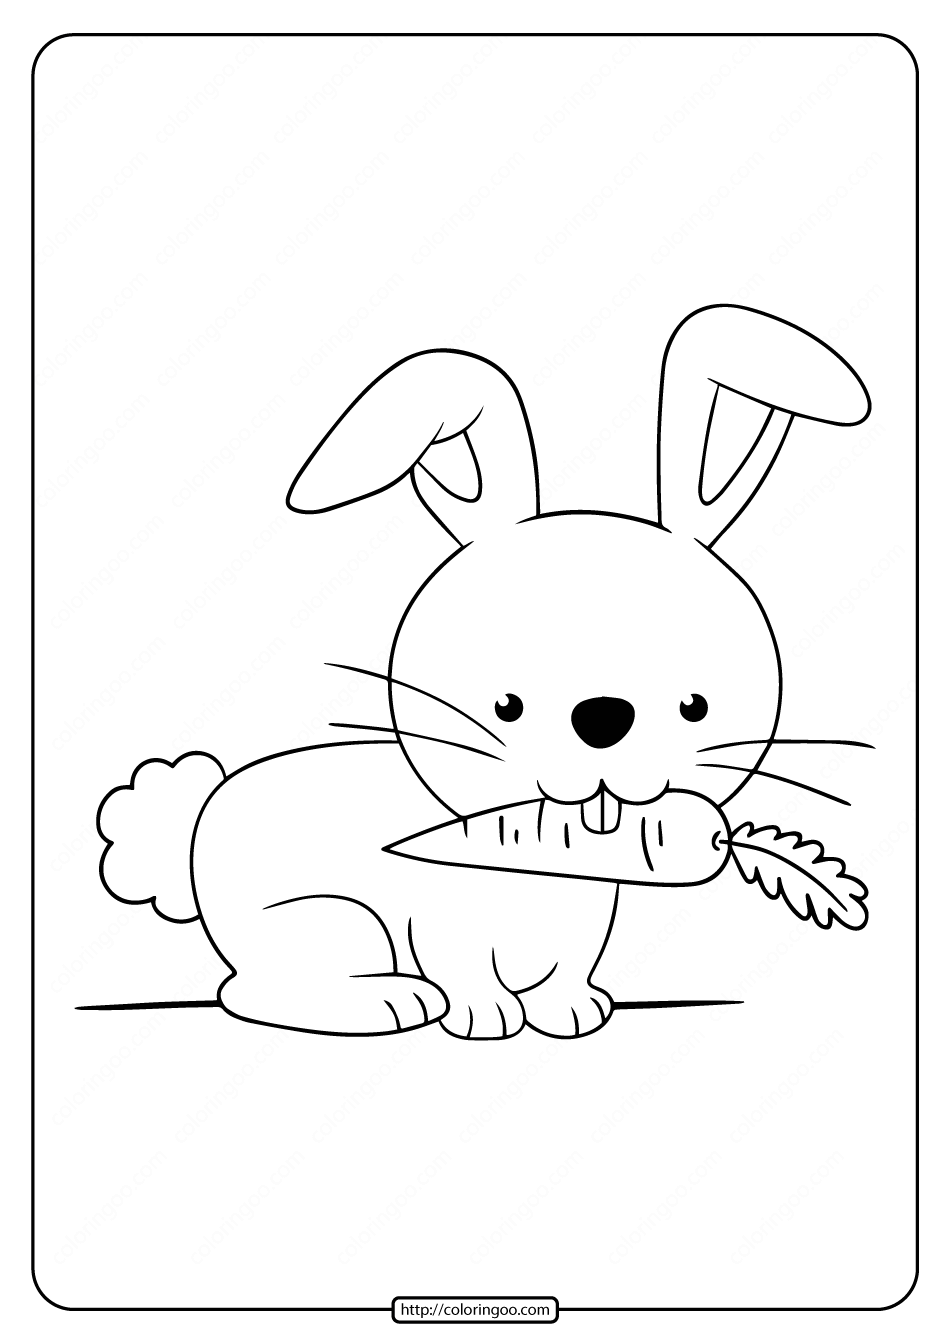 printable rabbit eat carrot coloring pages